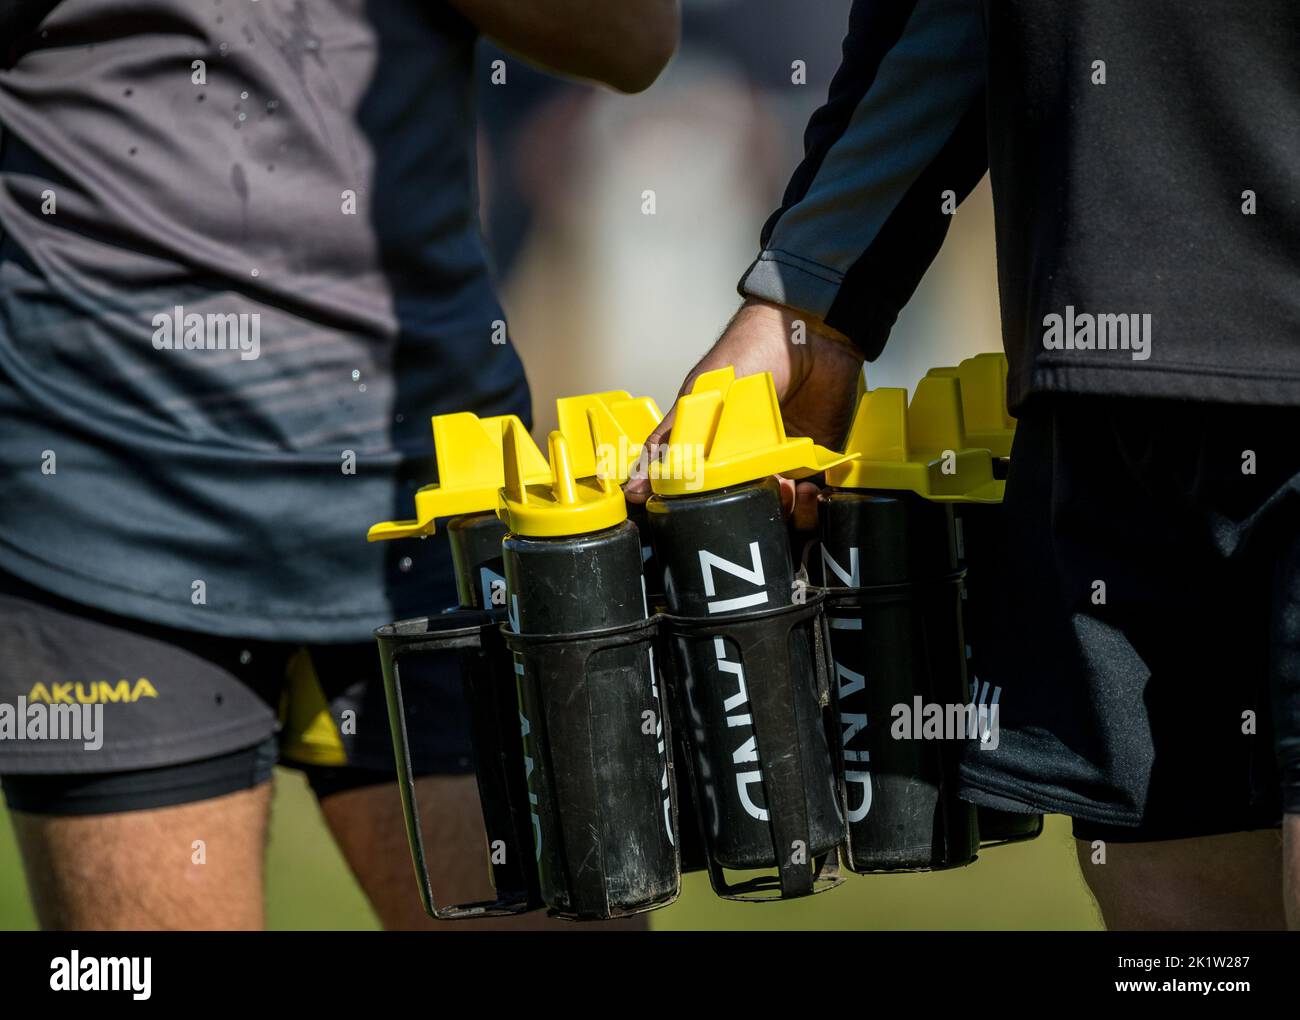 Rugby support team member carrying plastic Ziland water bottles. Stock Photo